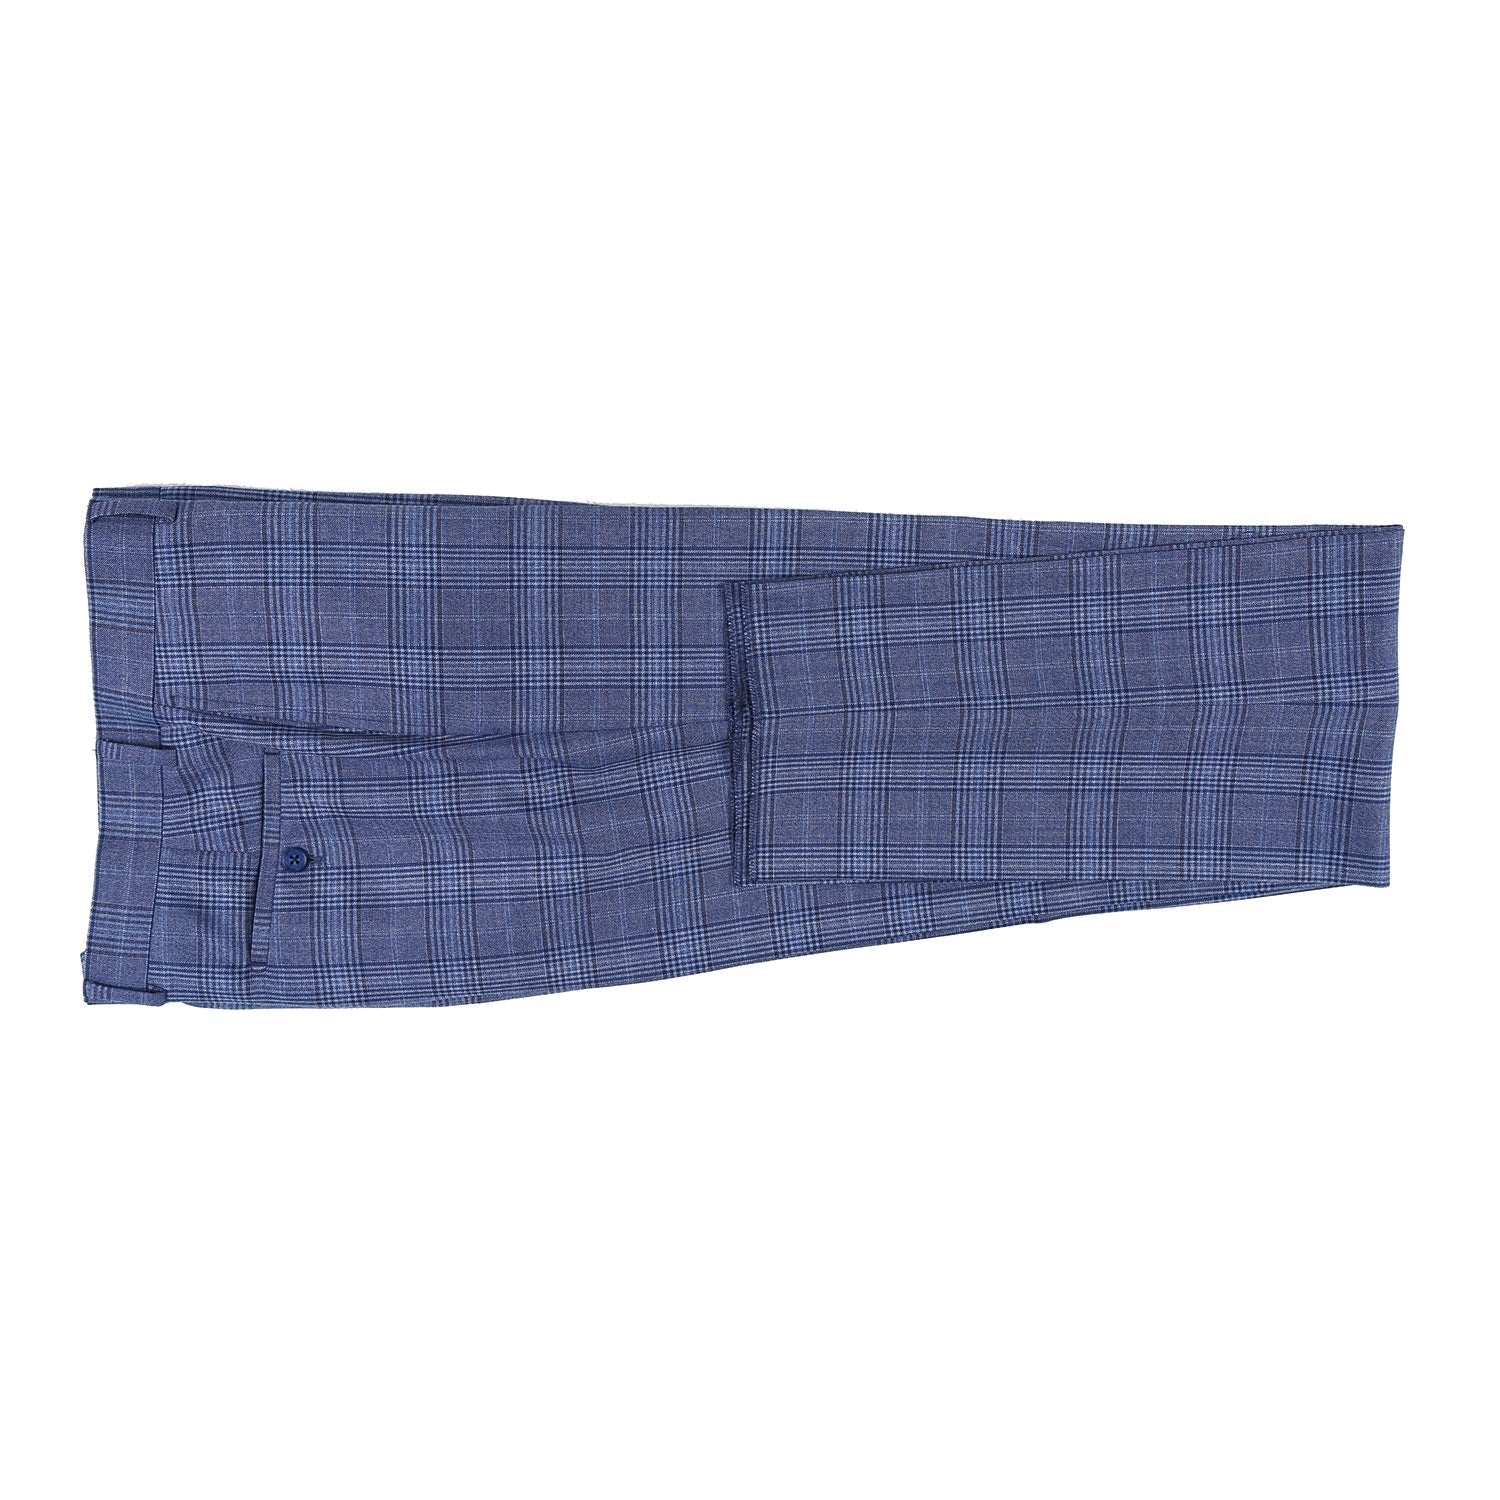 Wool Stretch Single Breasted SLIM FIT Suit in Denim Blue Glen Check (Short, Regular, and Long Available) by English Laundry